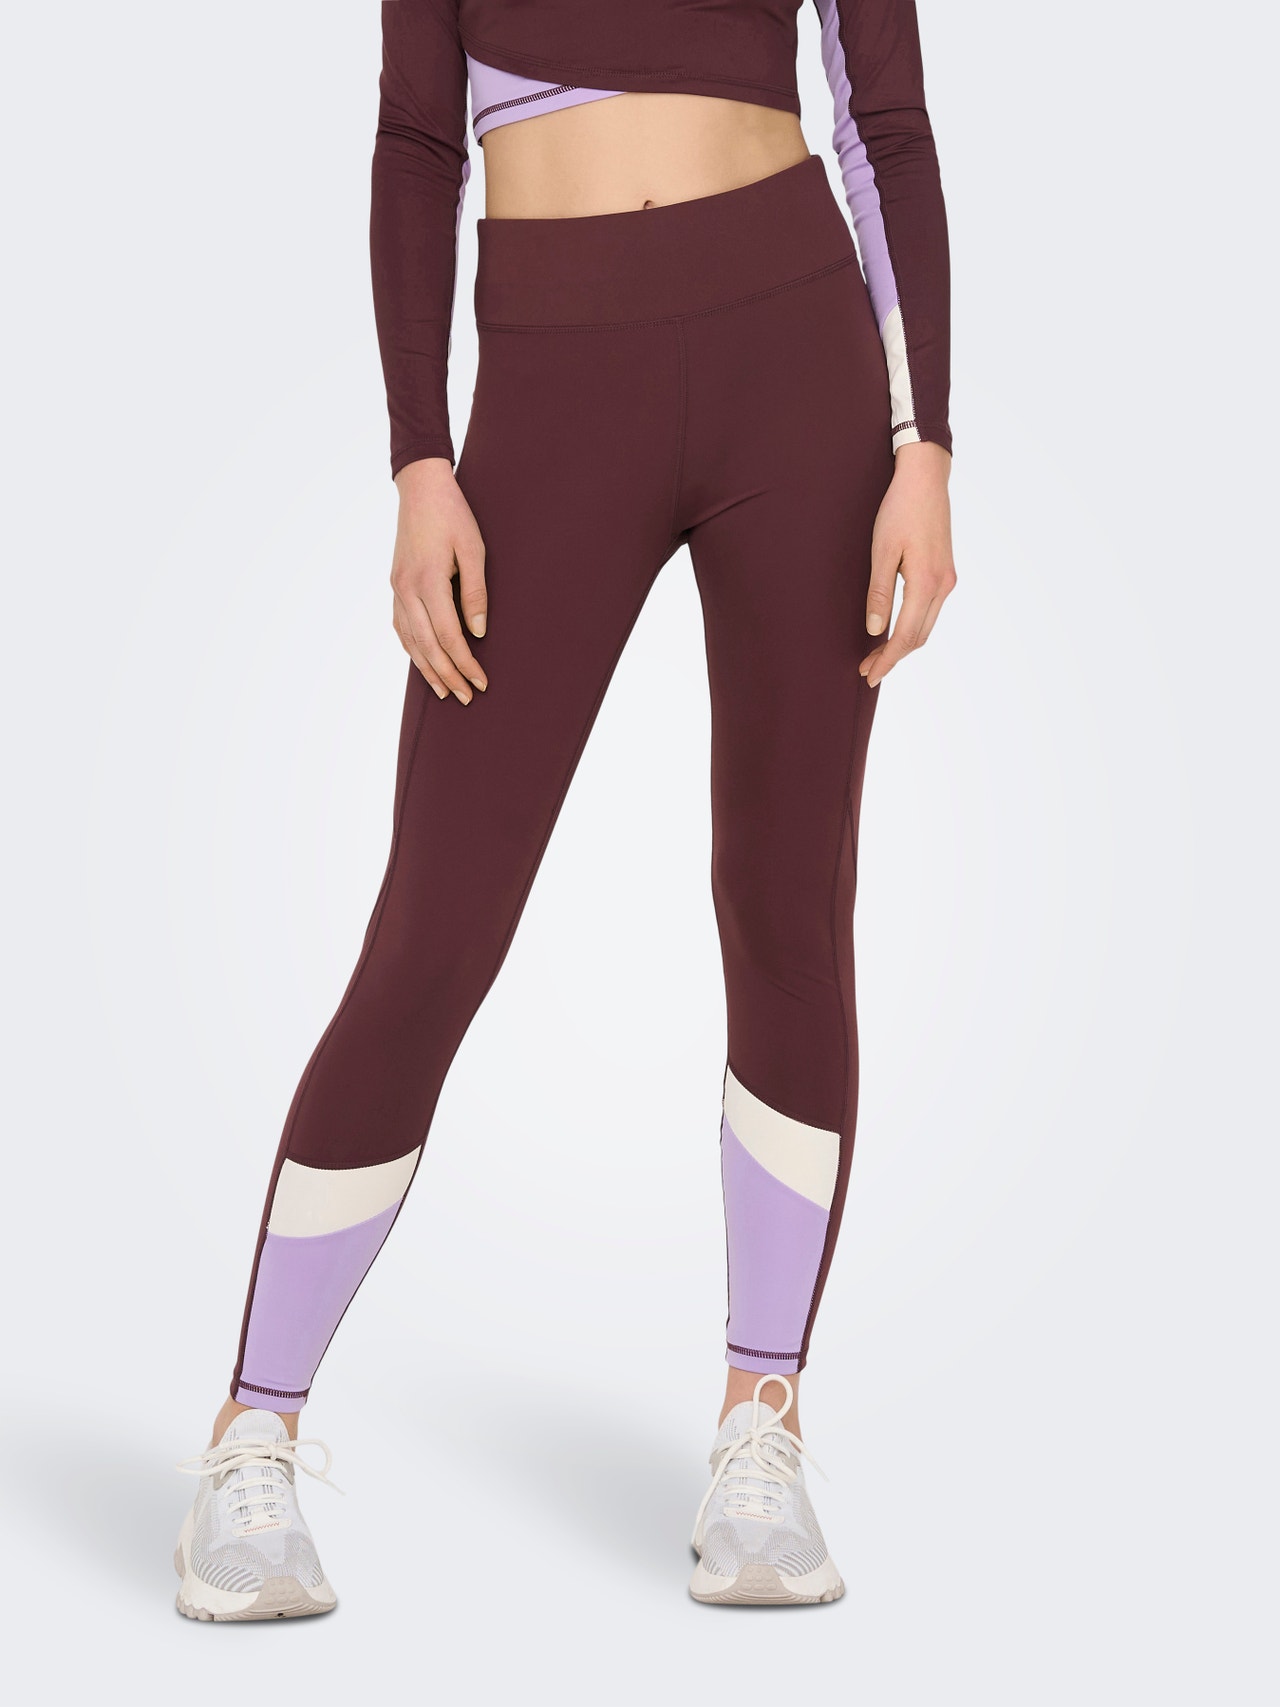 Highwaisted color block Training Tights with 30% discount!